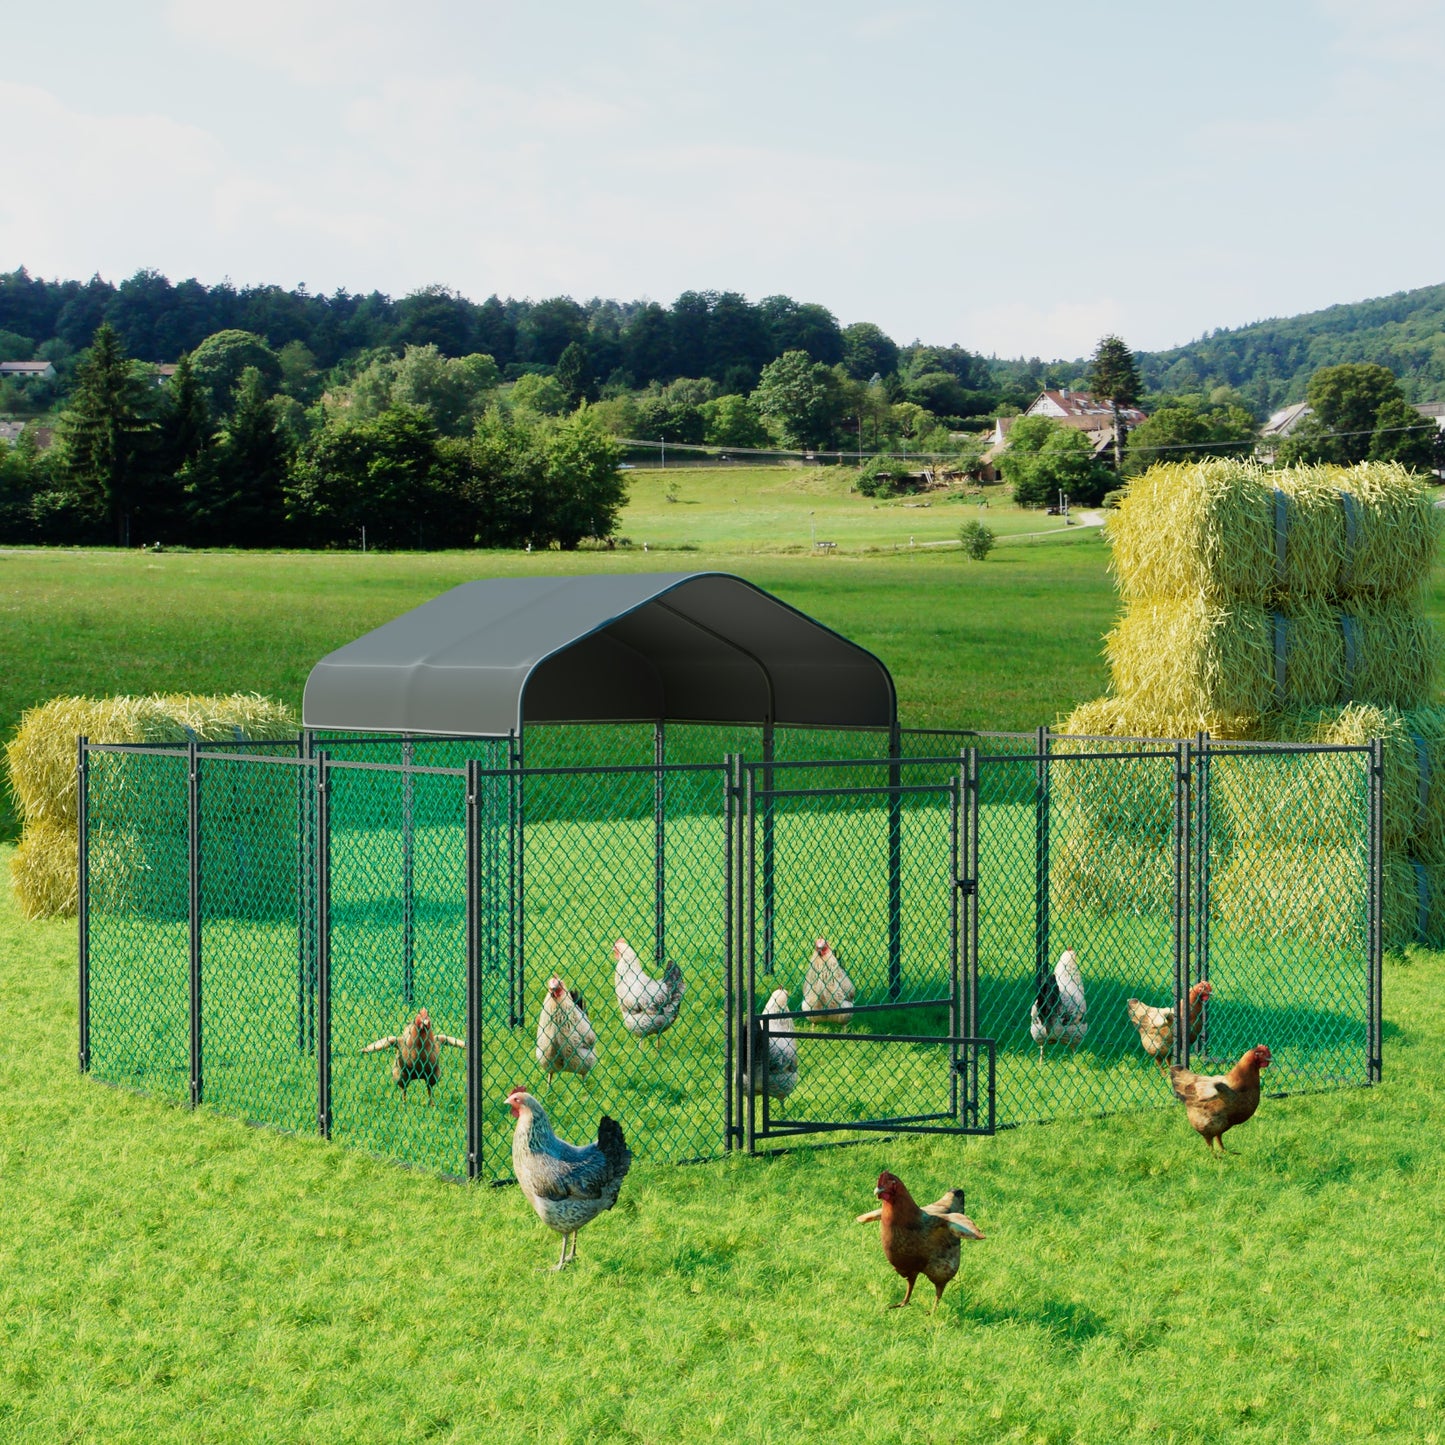 Walk-in Poultry Chicken Coop,Duck Goose Fence with Waterproof and UV Cover,Large Metal Hen House for Outdoor,Farm 12.9x10.2x5.1ft